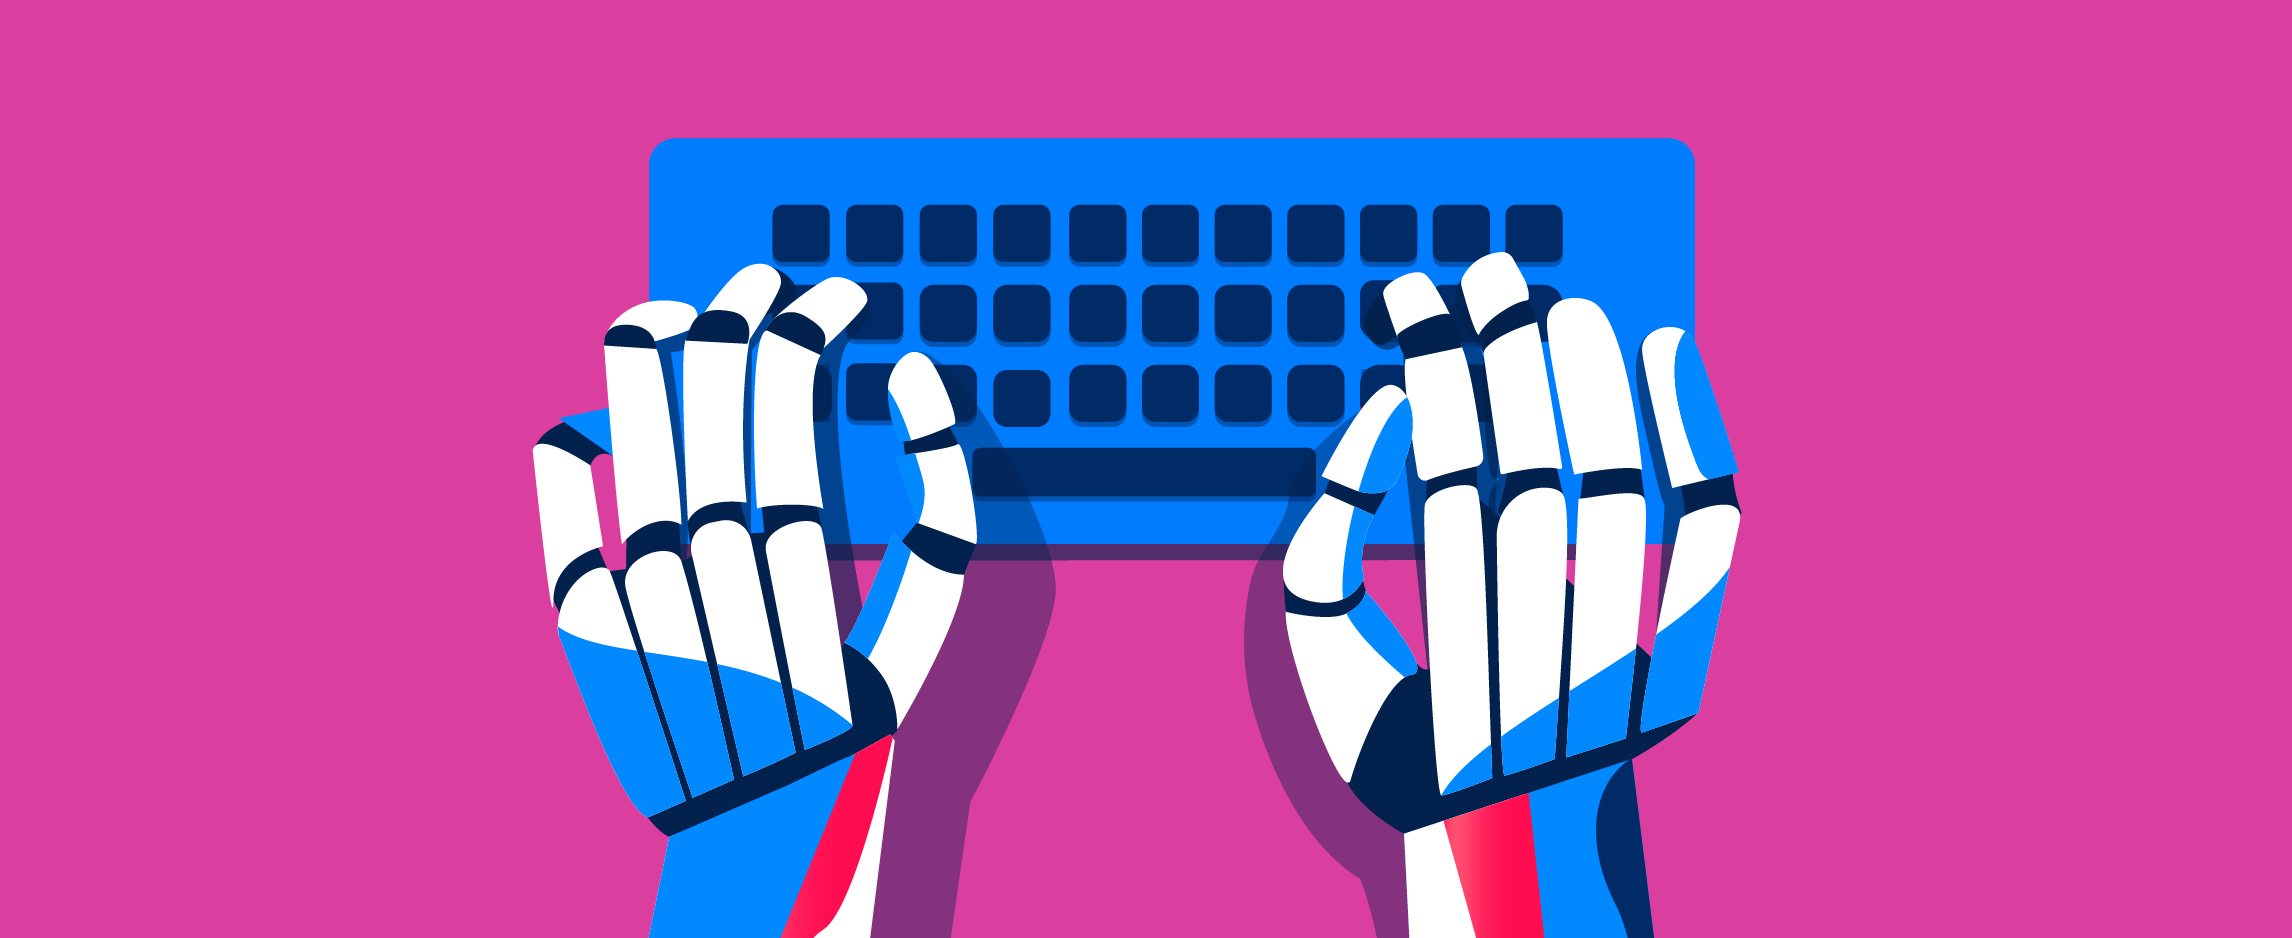 An illustration of a robot typing on a keyboard to represent chatbots